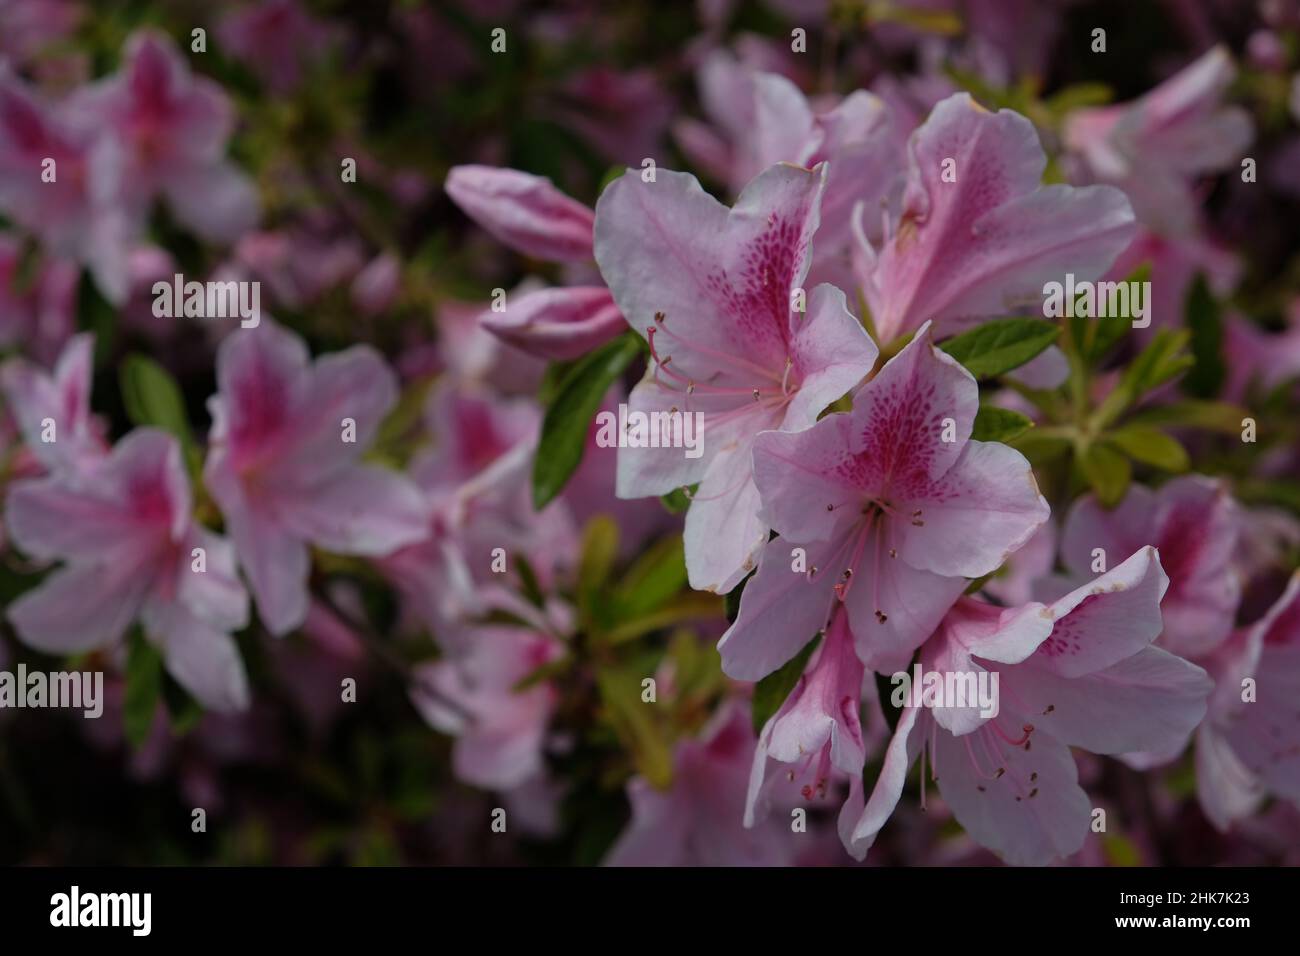 Clusters of flowers mostly light pink with intense many dark spots of pink, long reproductive organs. Green leaves on bush, bokeh background buds. Stock Photo